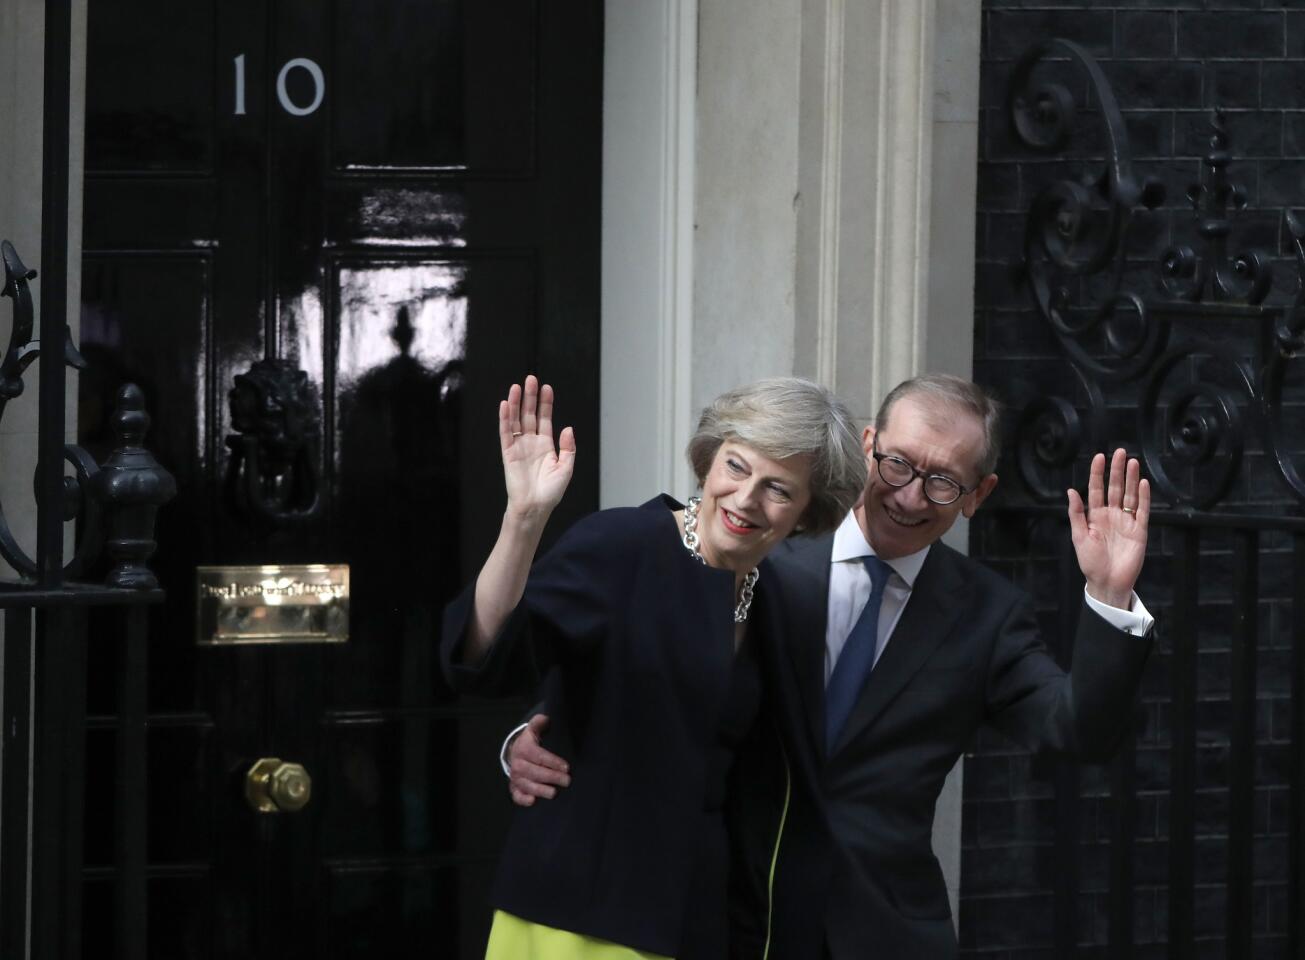 Newly appointed Prime Minister Theresa May, with her husband Philip, arrives to take up residence in 10 Downing Street on July 13, 2016 in London.